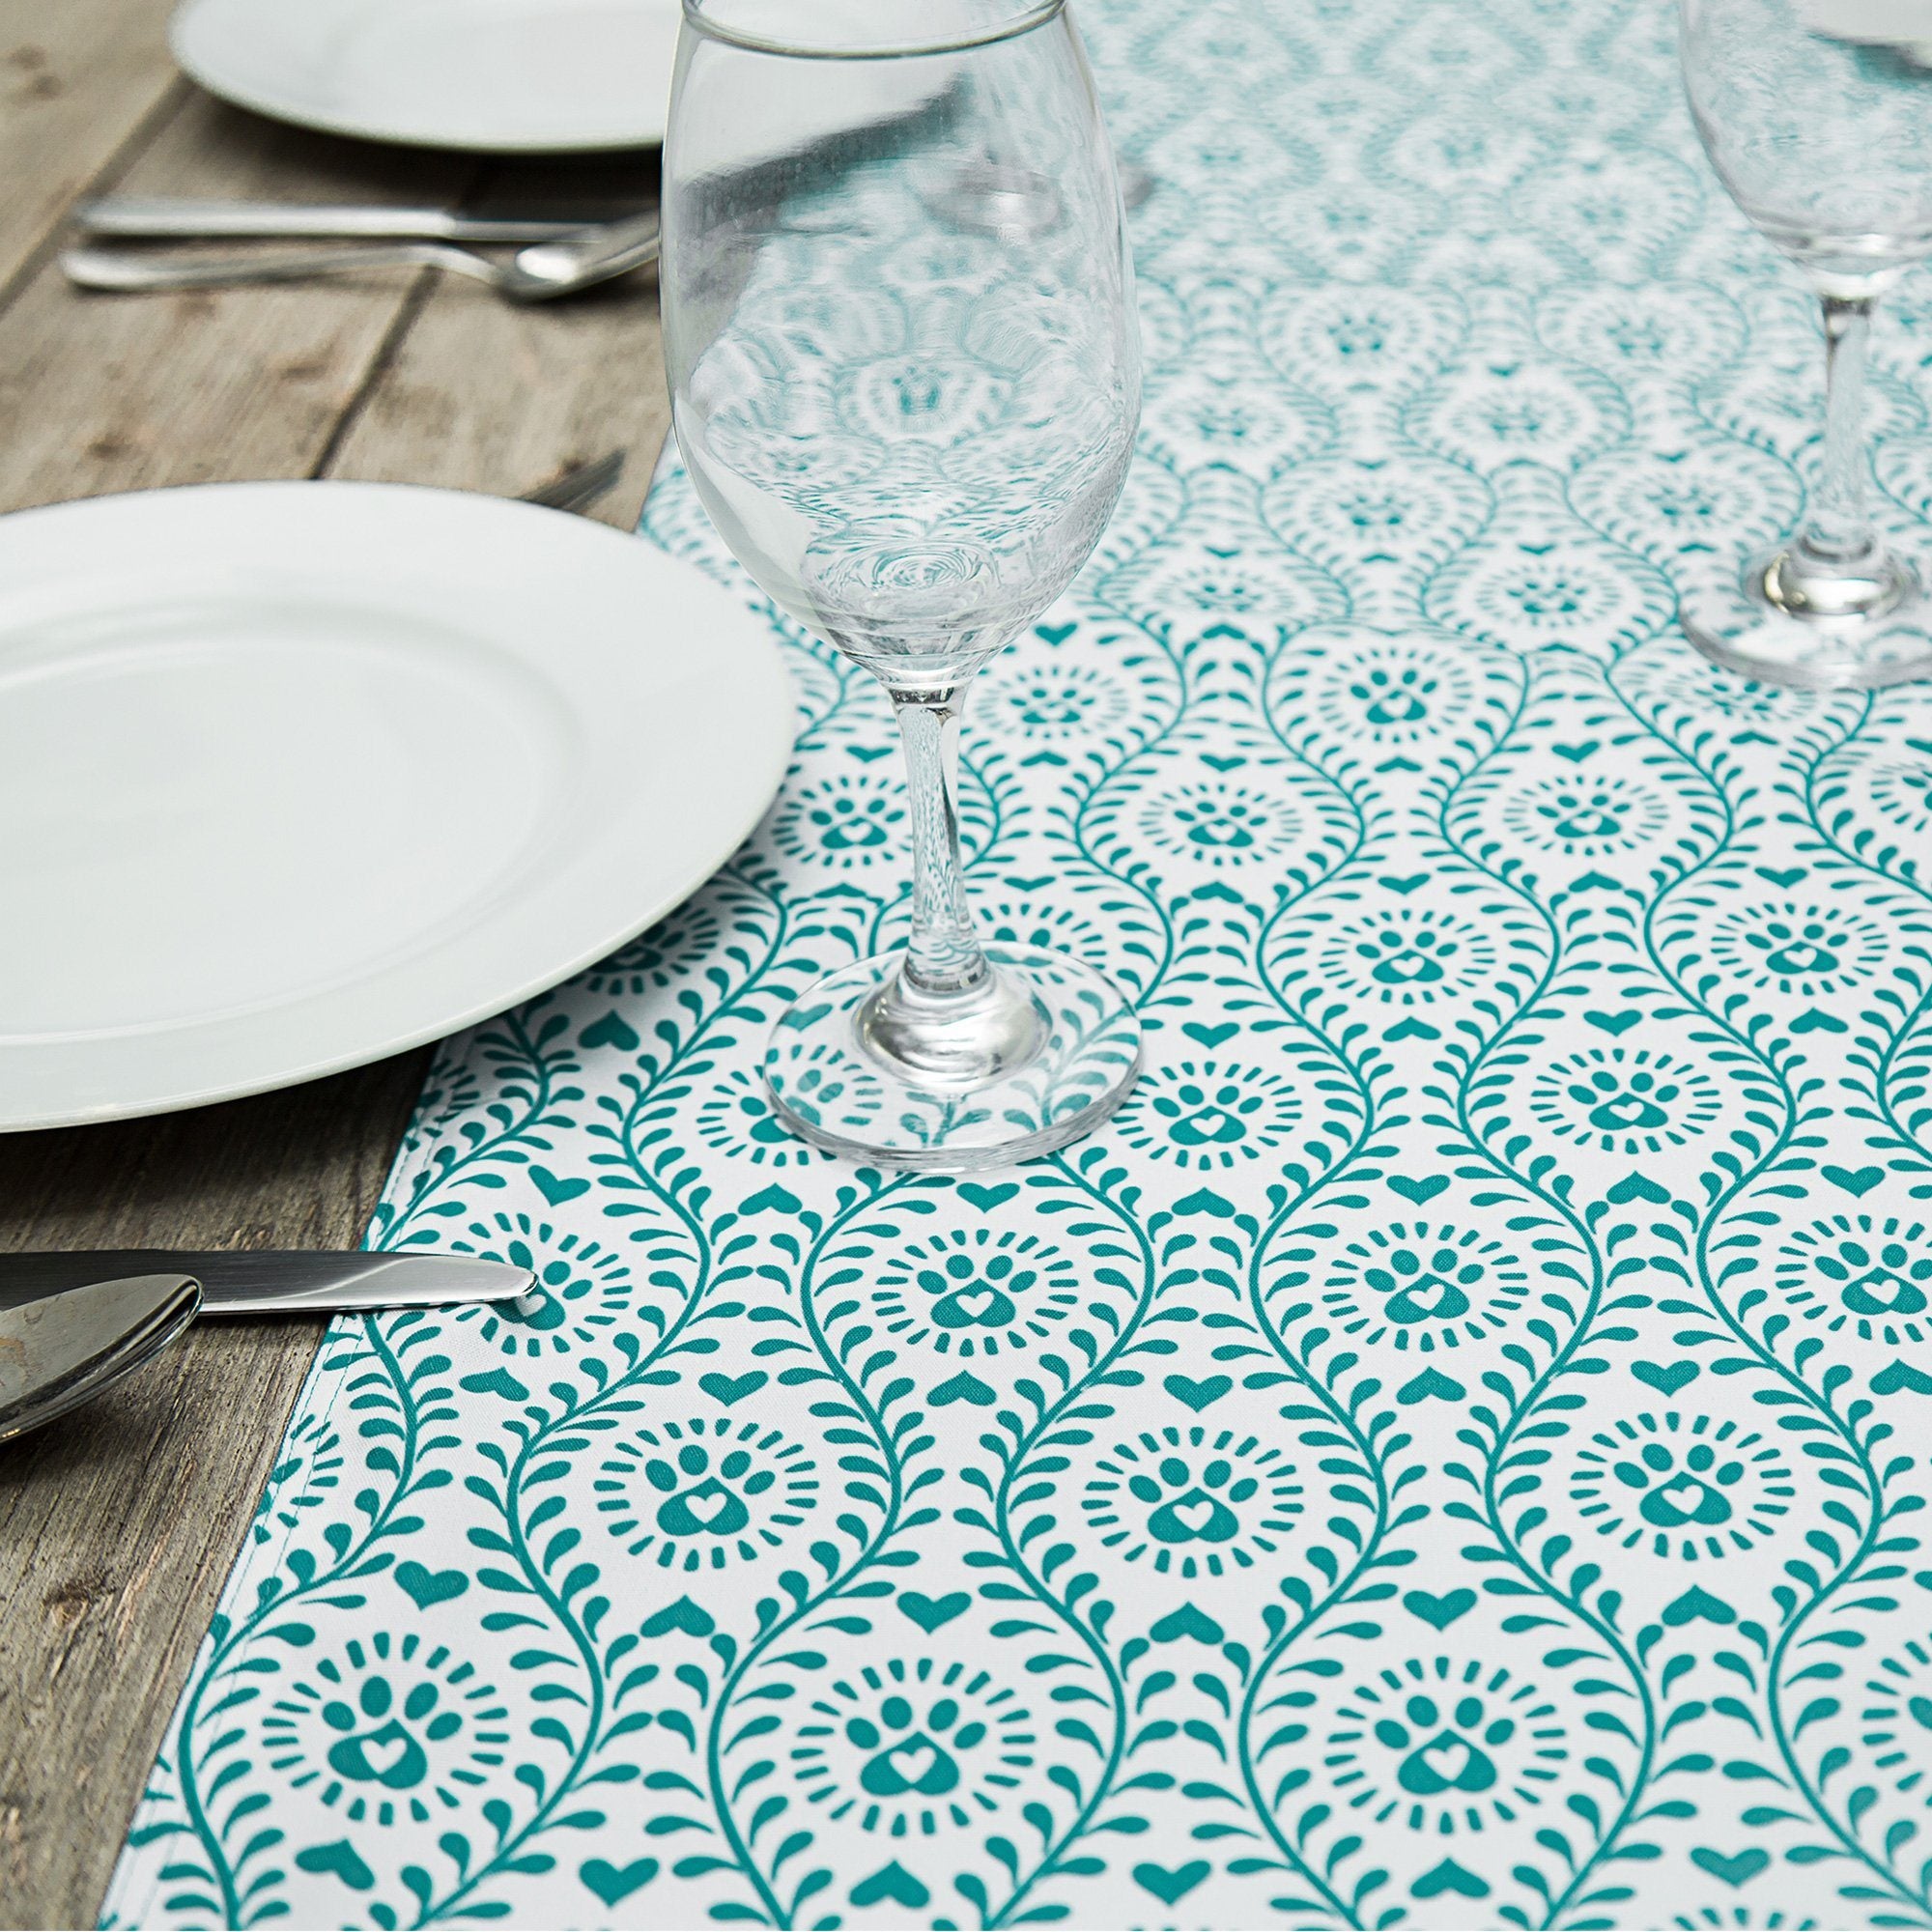 Blooming Paw Print Vines Kitchen Collection - Table Runner Only